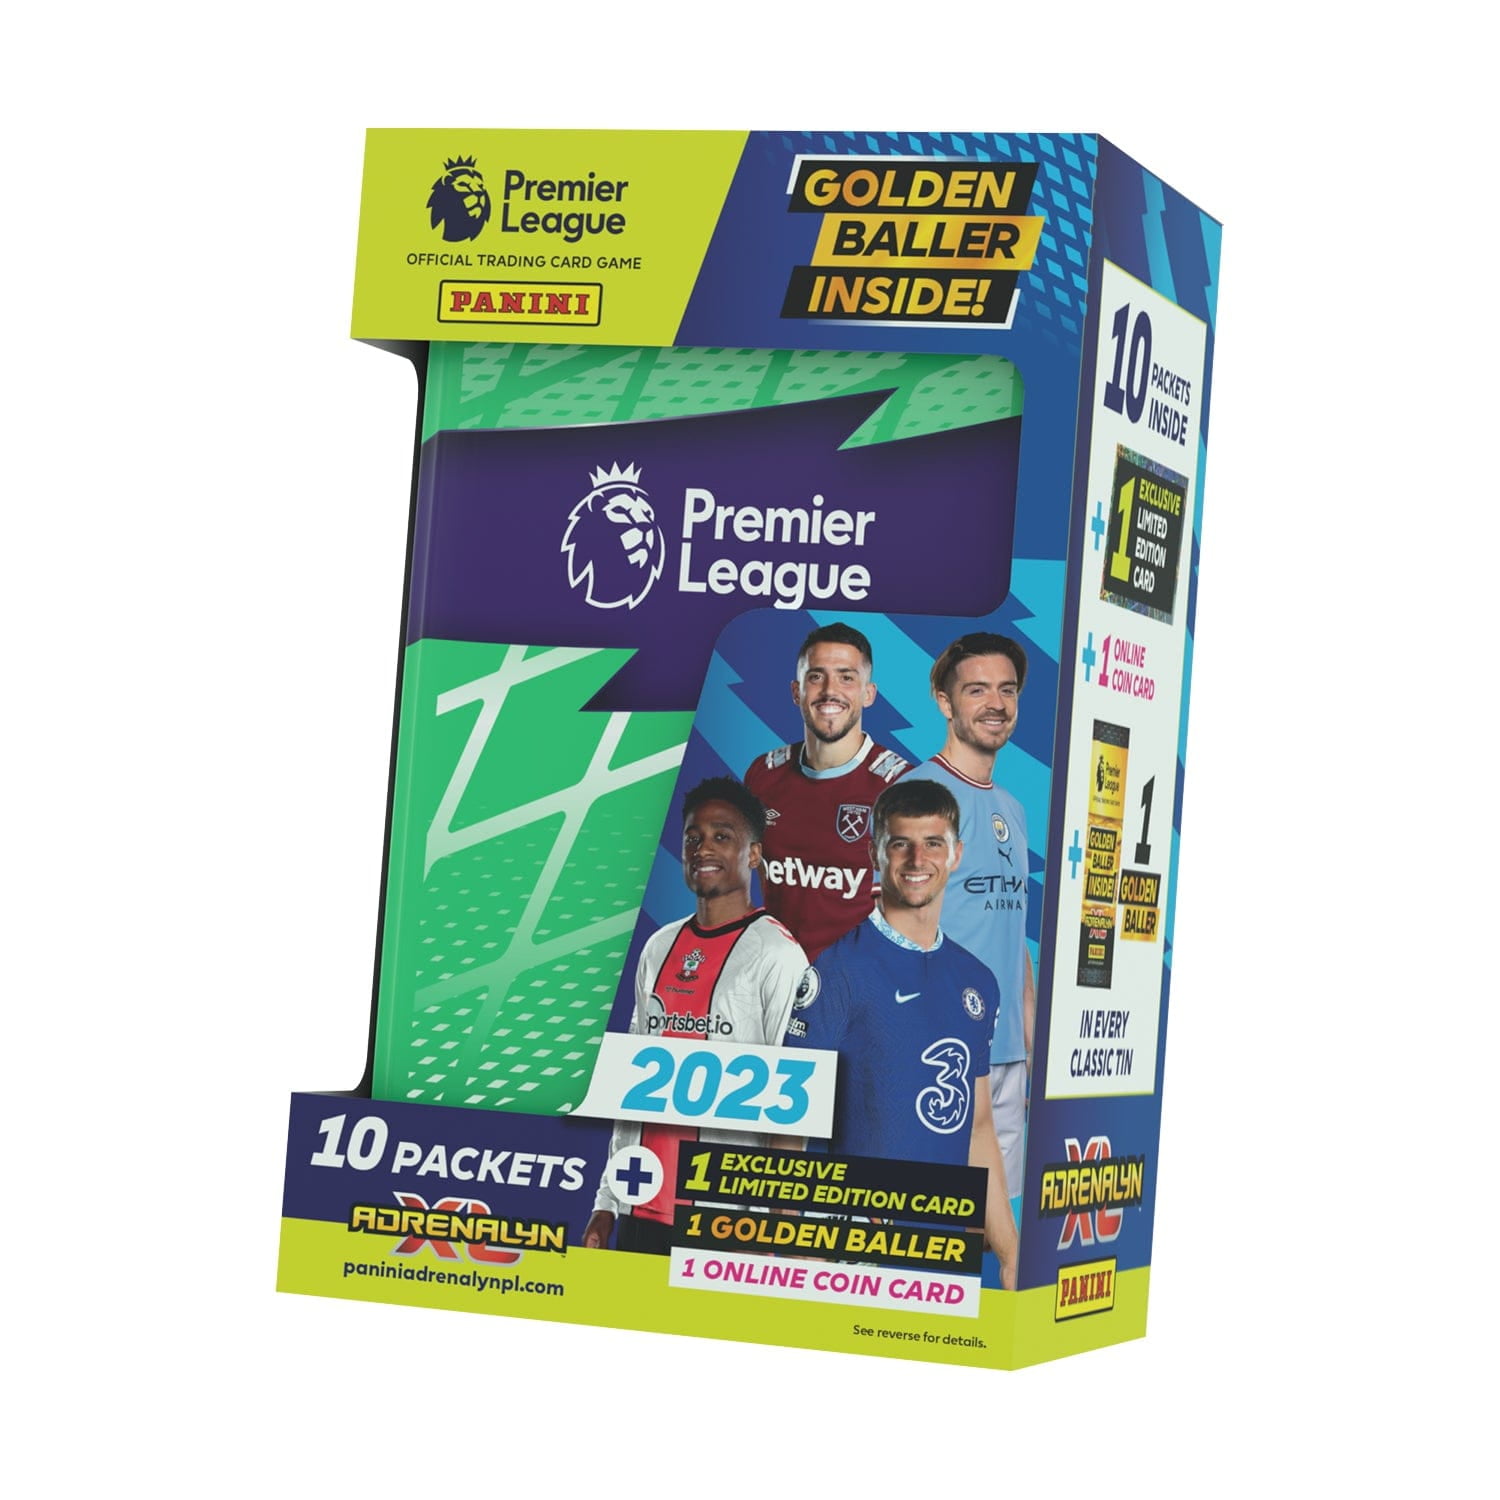 How to Play Panini Premier League Adrenalyn XL Trading Cards Game